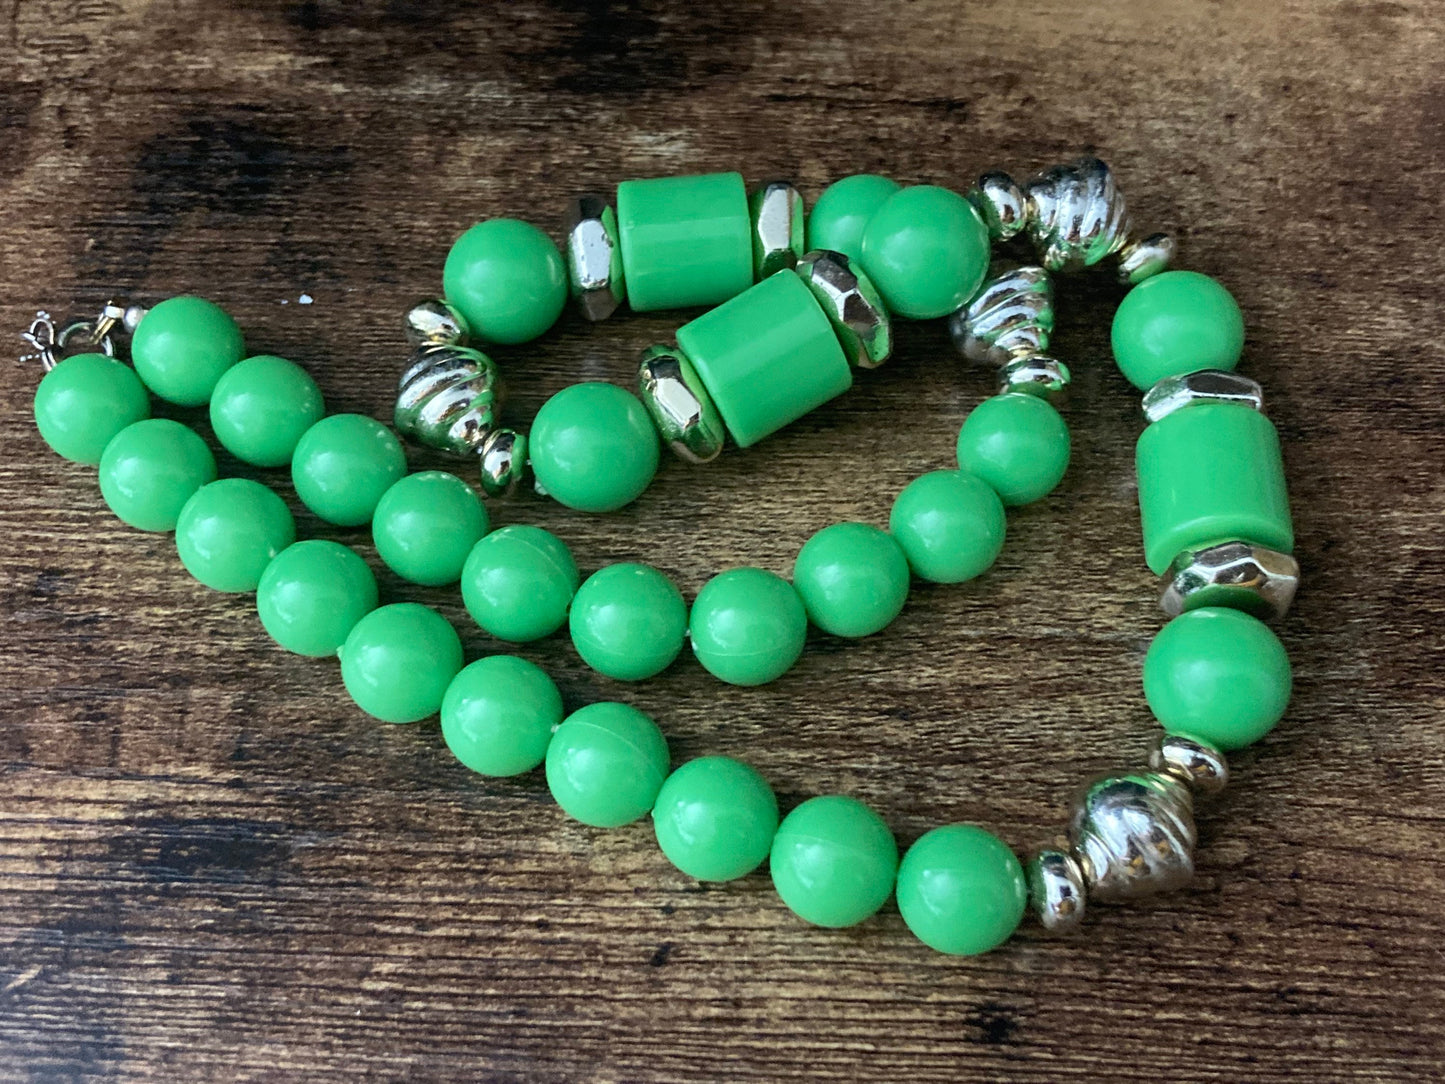 Vintage retro bright green and gold plastic beaded necklace 52cm long